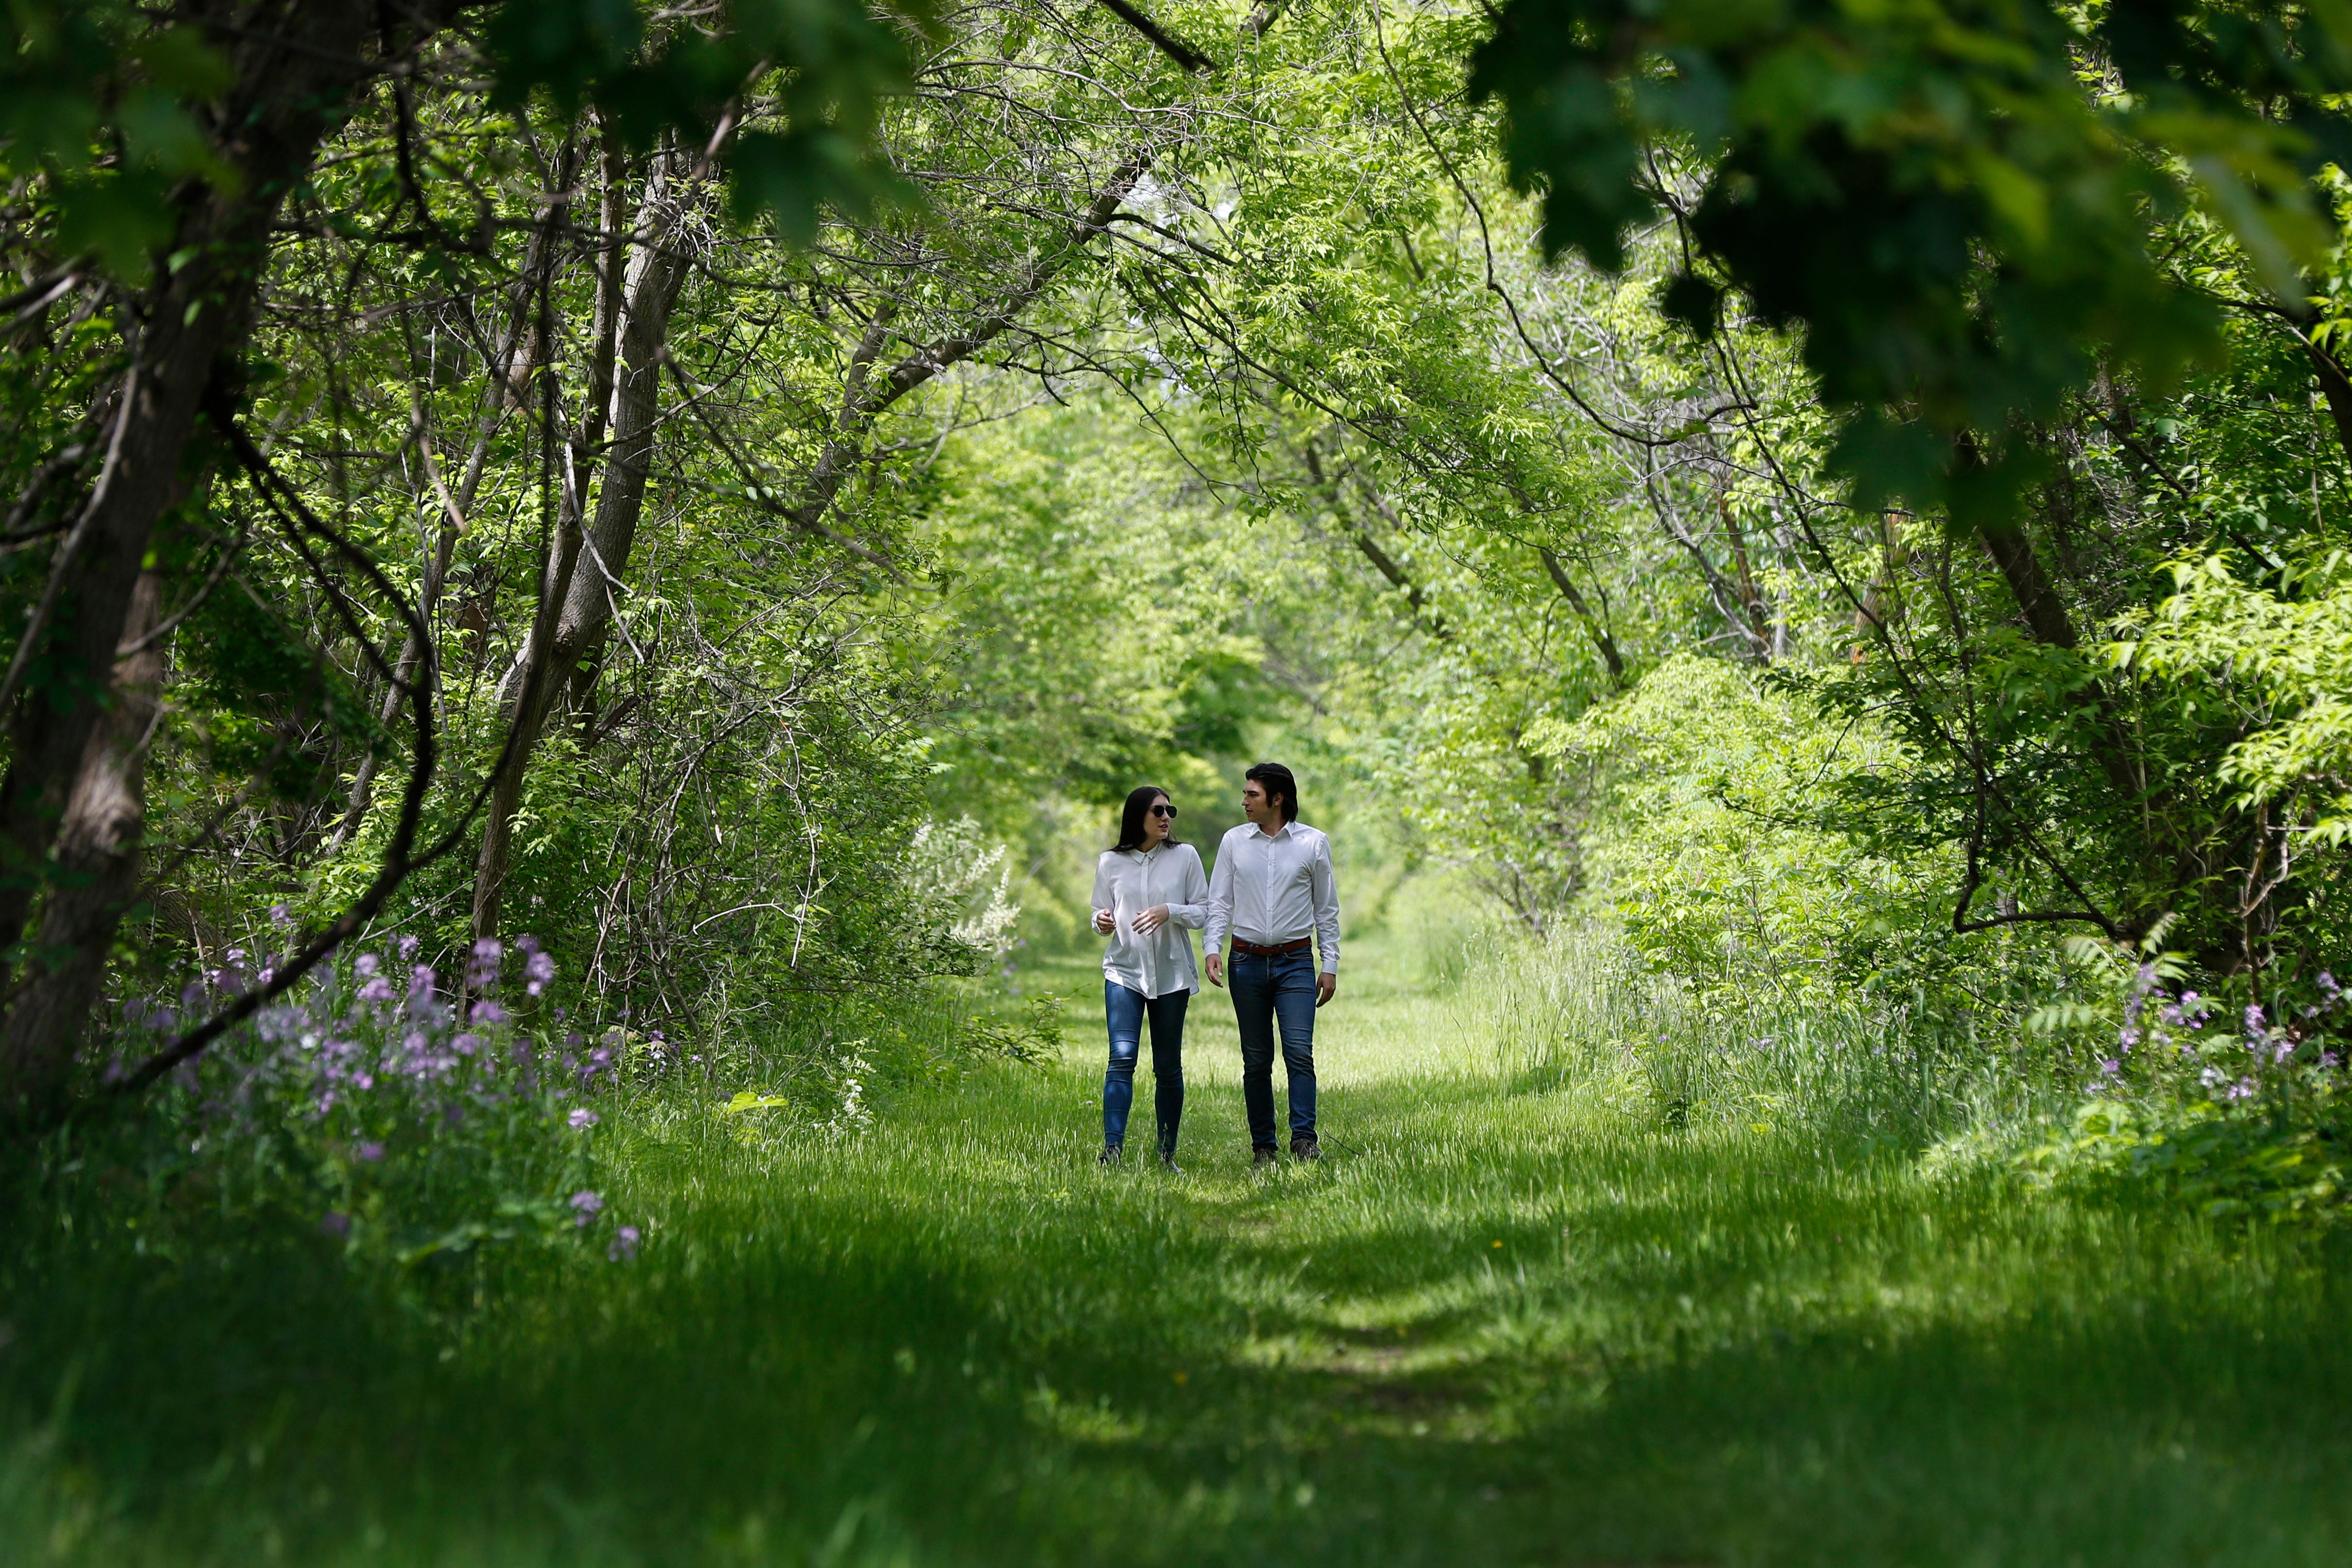 Mary Rose Maher and her fiance, William Chundrlik, walk through woods near a former Opus Bono Sacerdotii location in Dryden, Michigan, on June 5. Opus Bono ' s finances came under scrutiny after authorities were contacted by a once-loyal employee - Maher, the daughter of co-founder Joe Maher - who began questioning the way money was spent.